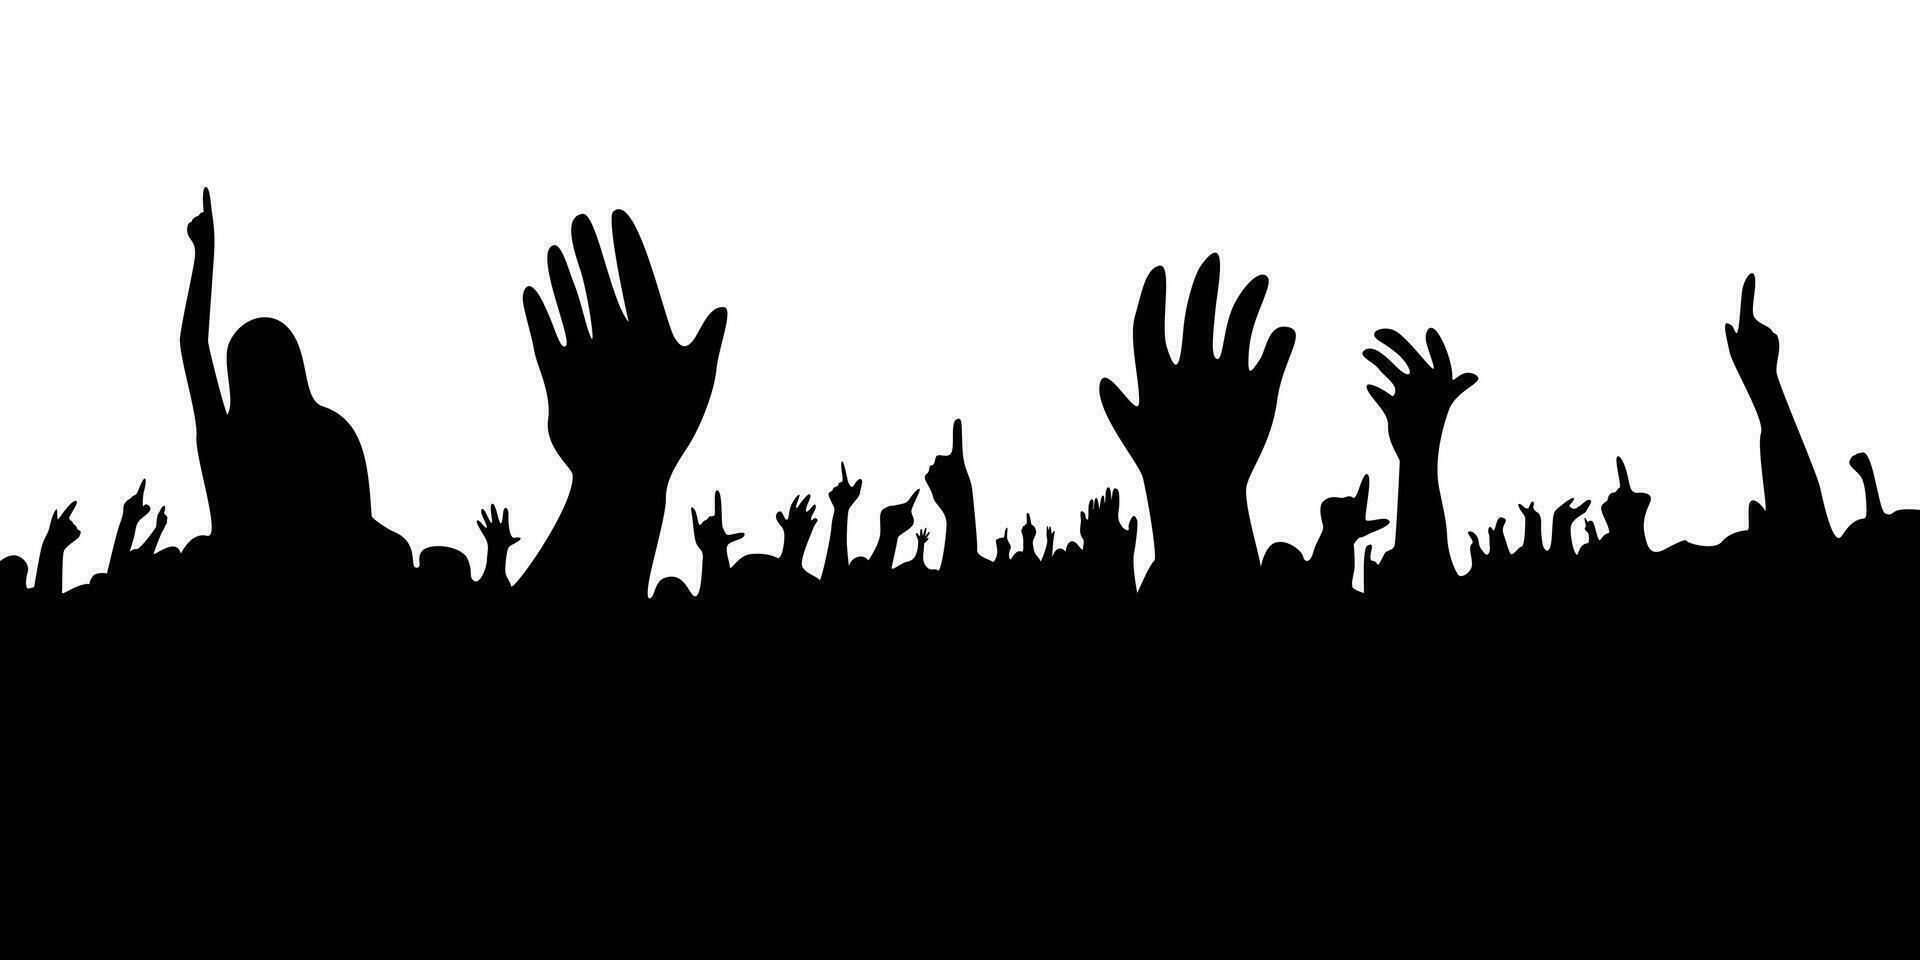 audience in concert silhouette. people crowd in festival icon, sign and symbol. vector